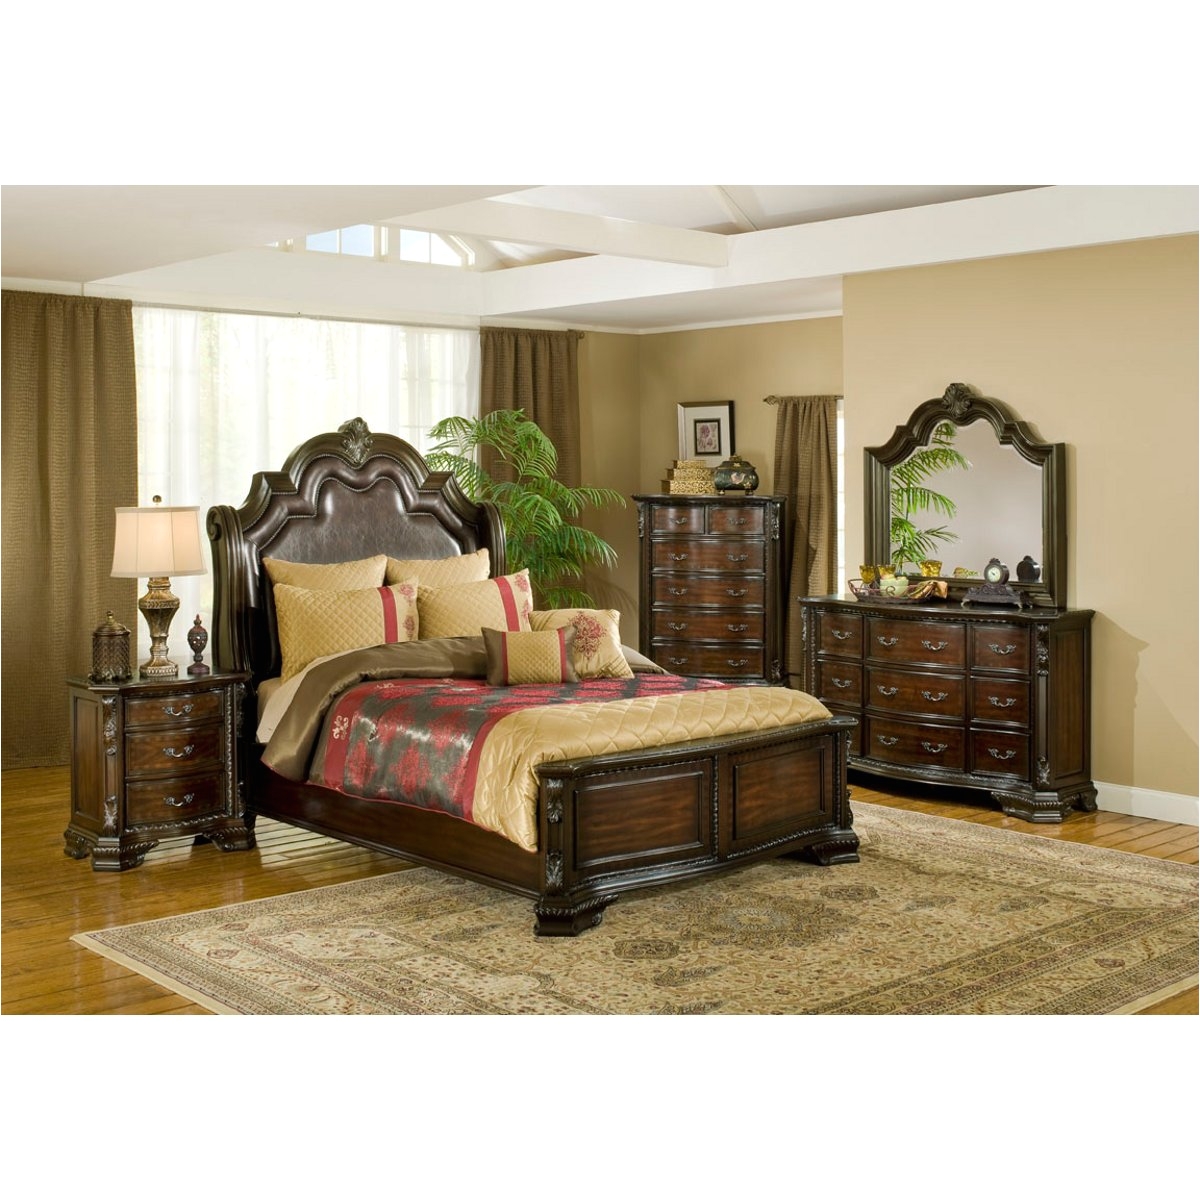 remodell your home design ideas with cool great conns bedroom furniture and would improve with great